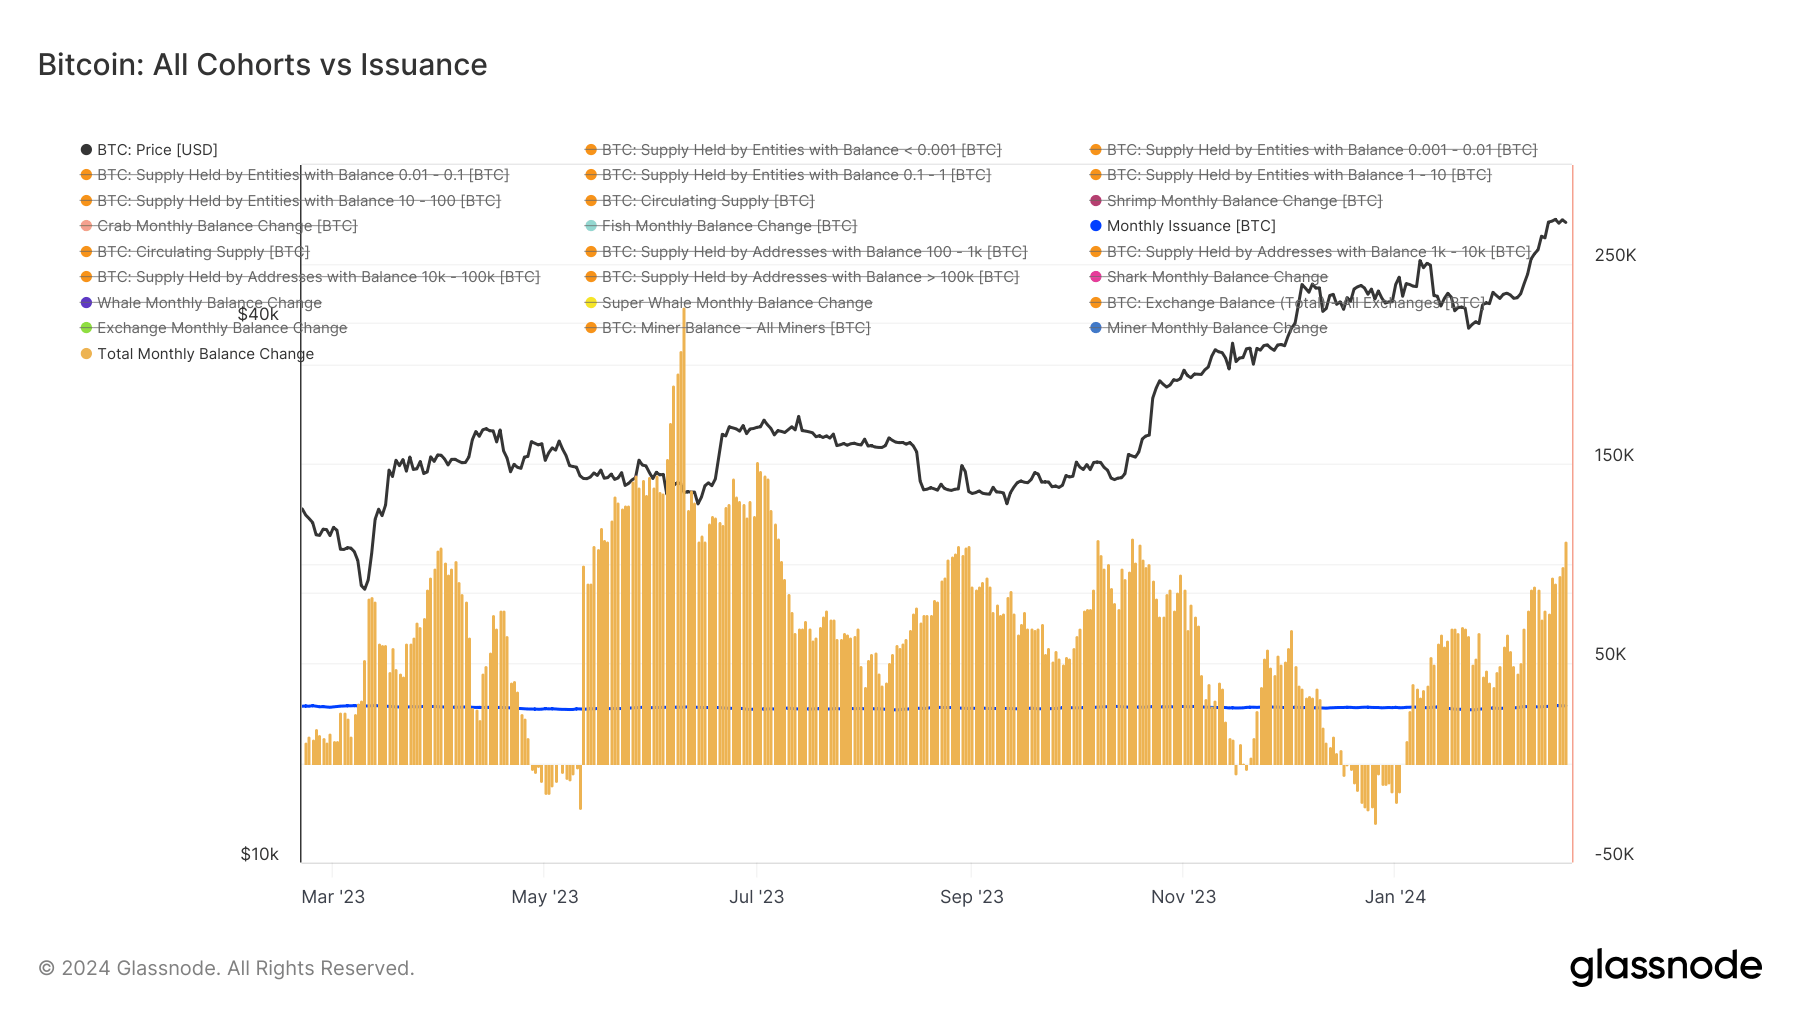 Bitcoin All Cohorts vs Issuance: (Source: Glassnode)